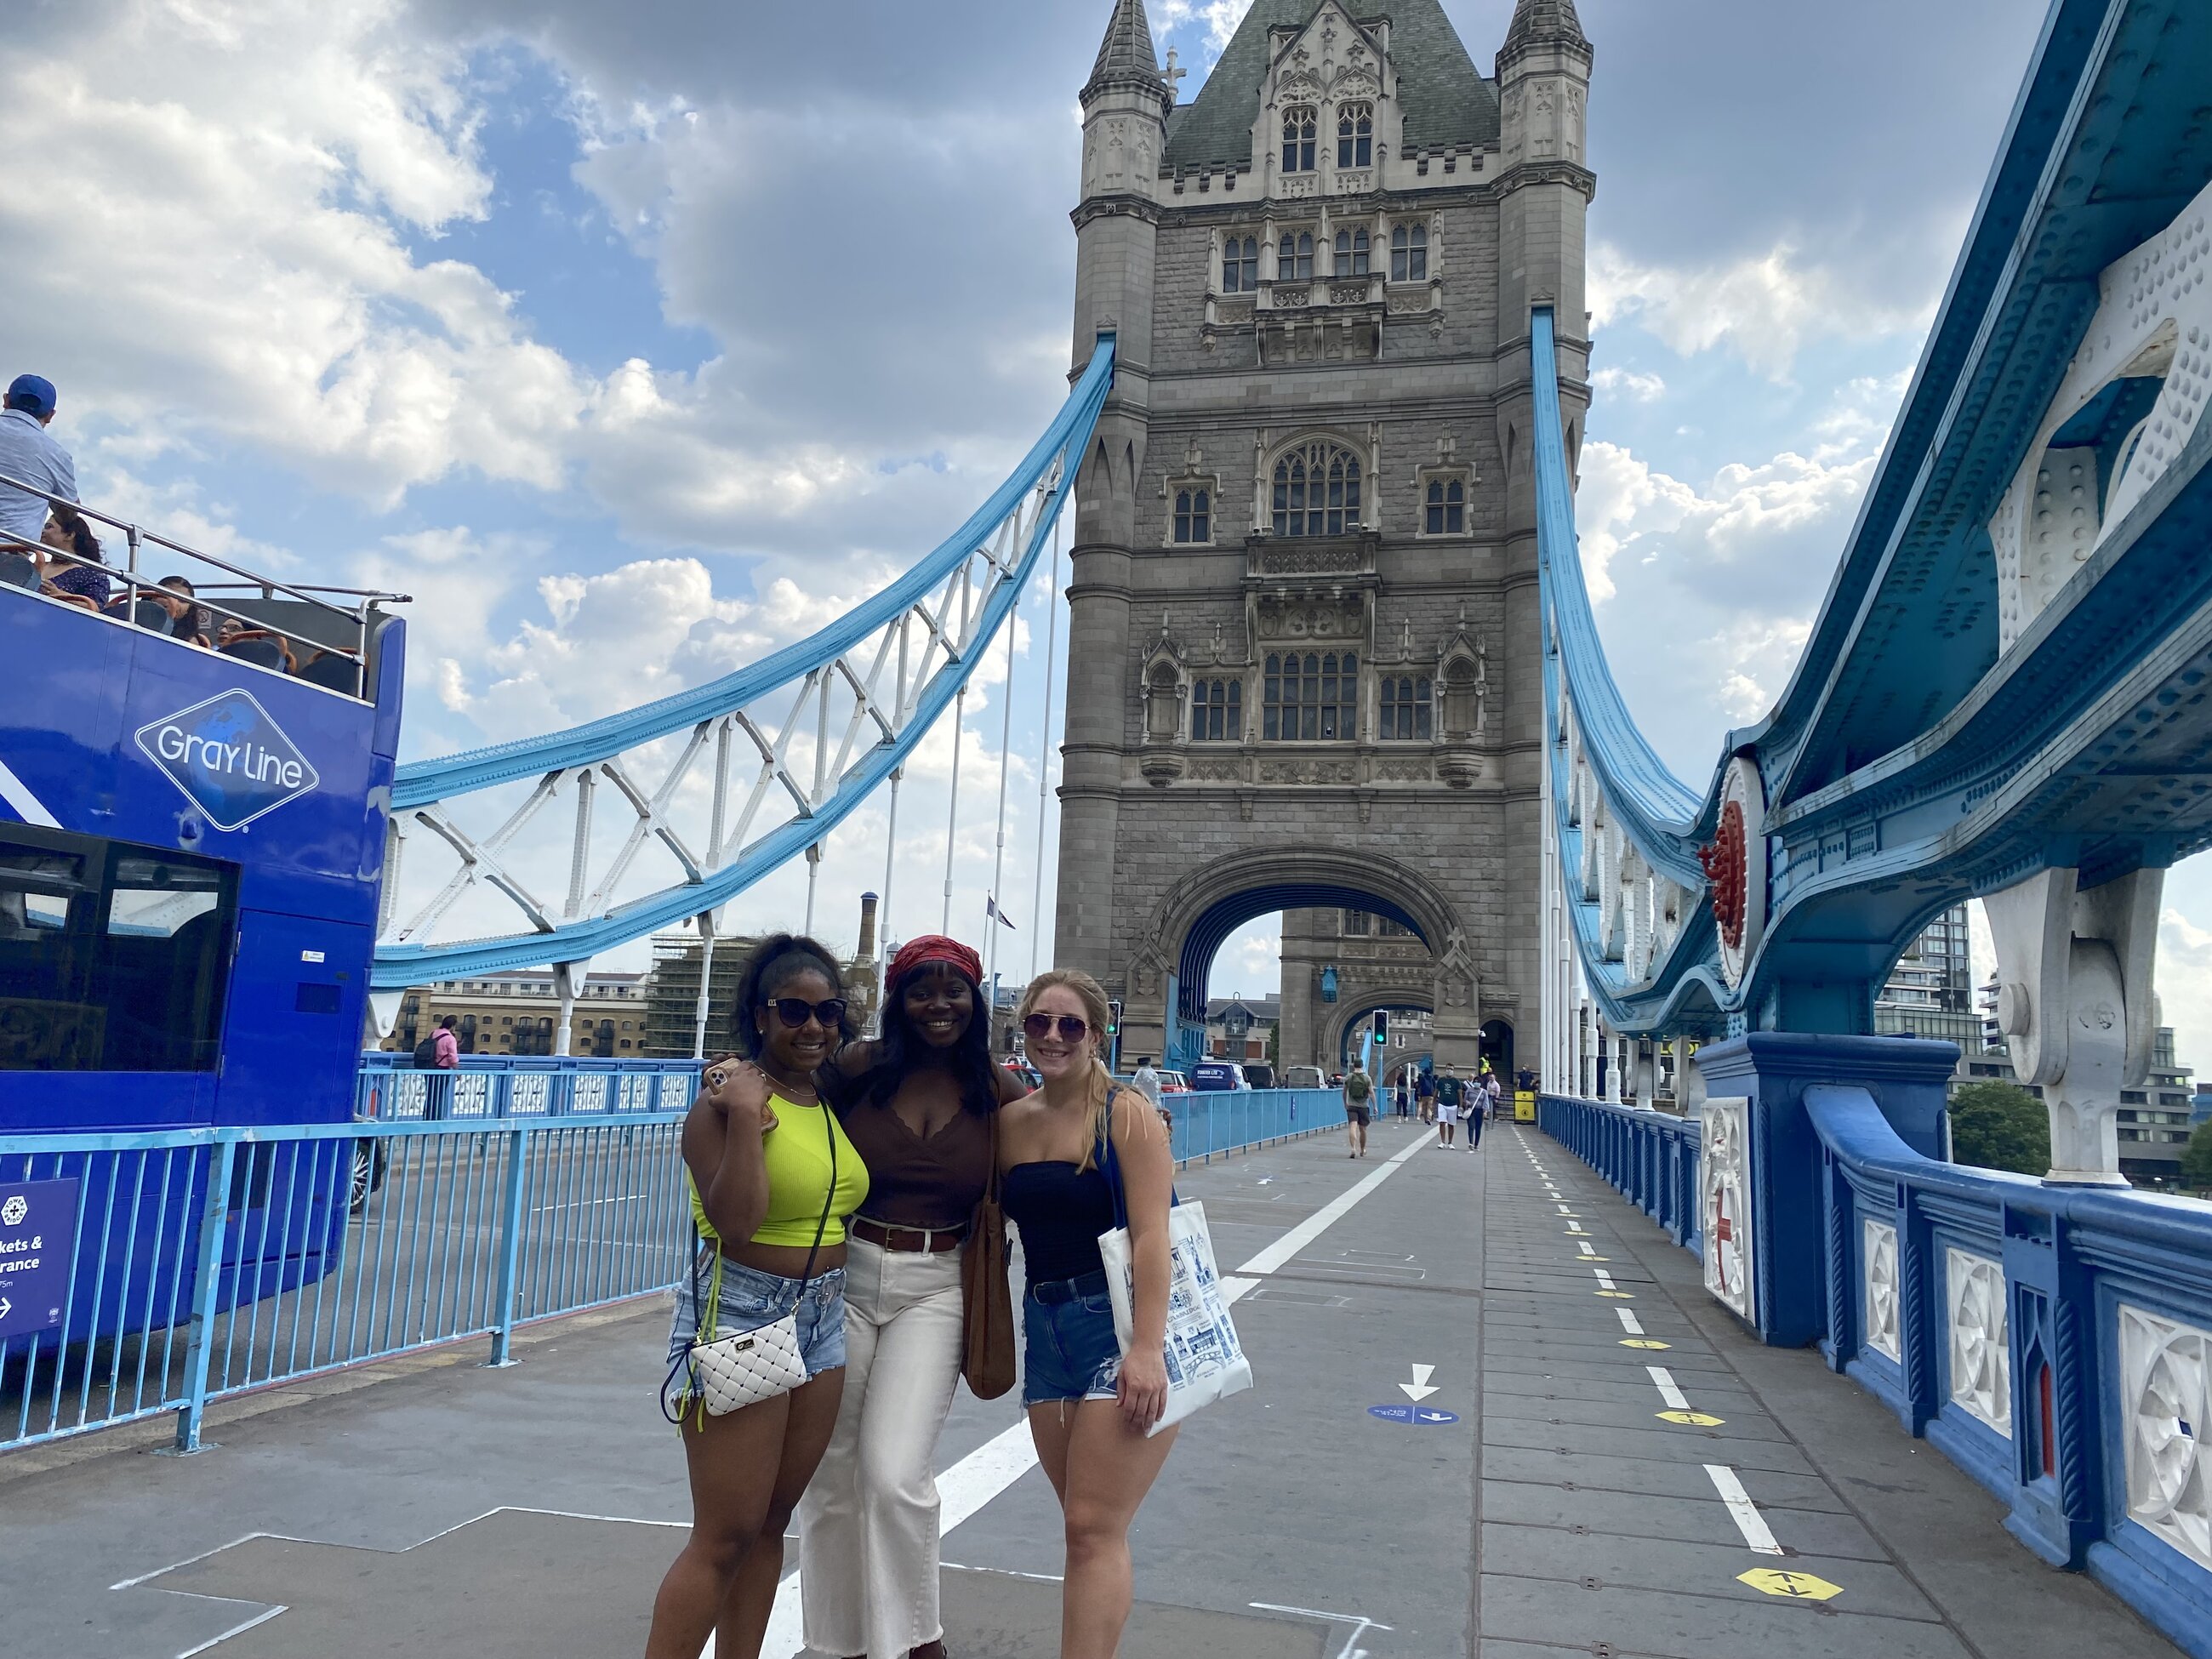 Visiting the London Bridge with friends!